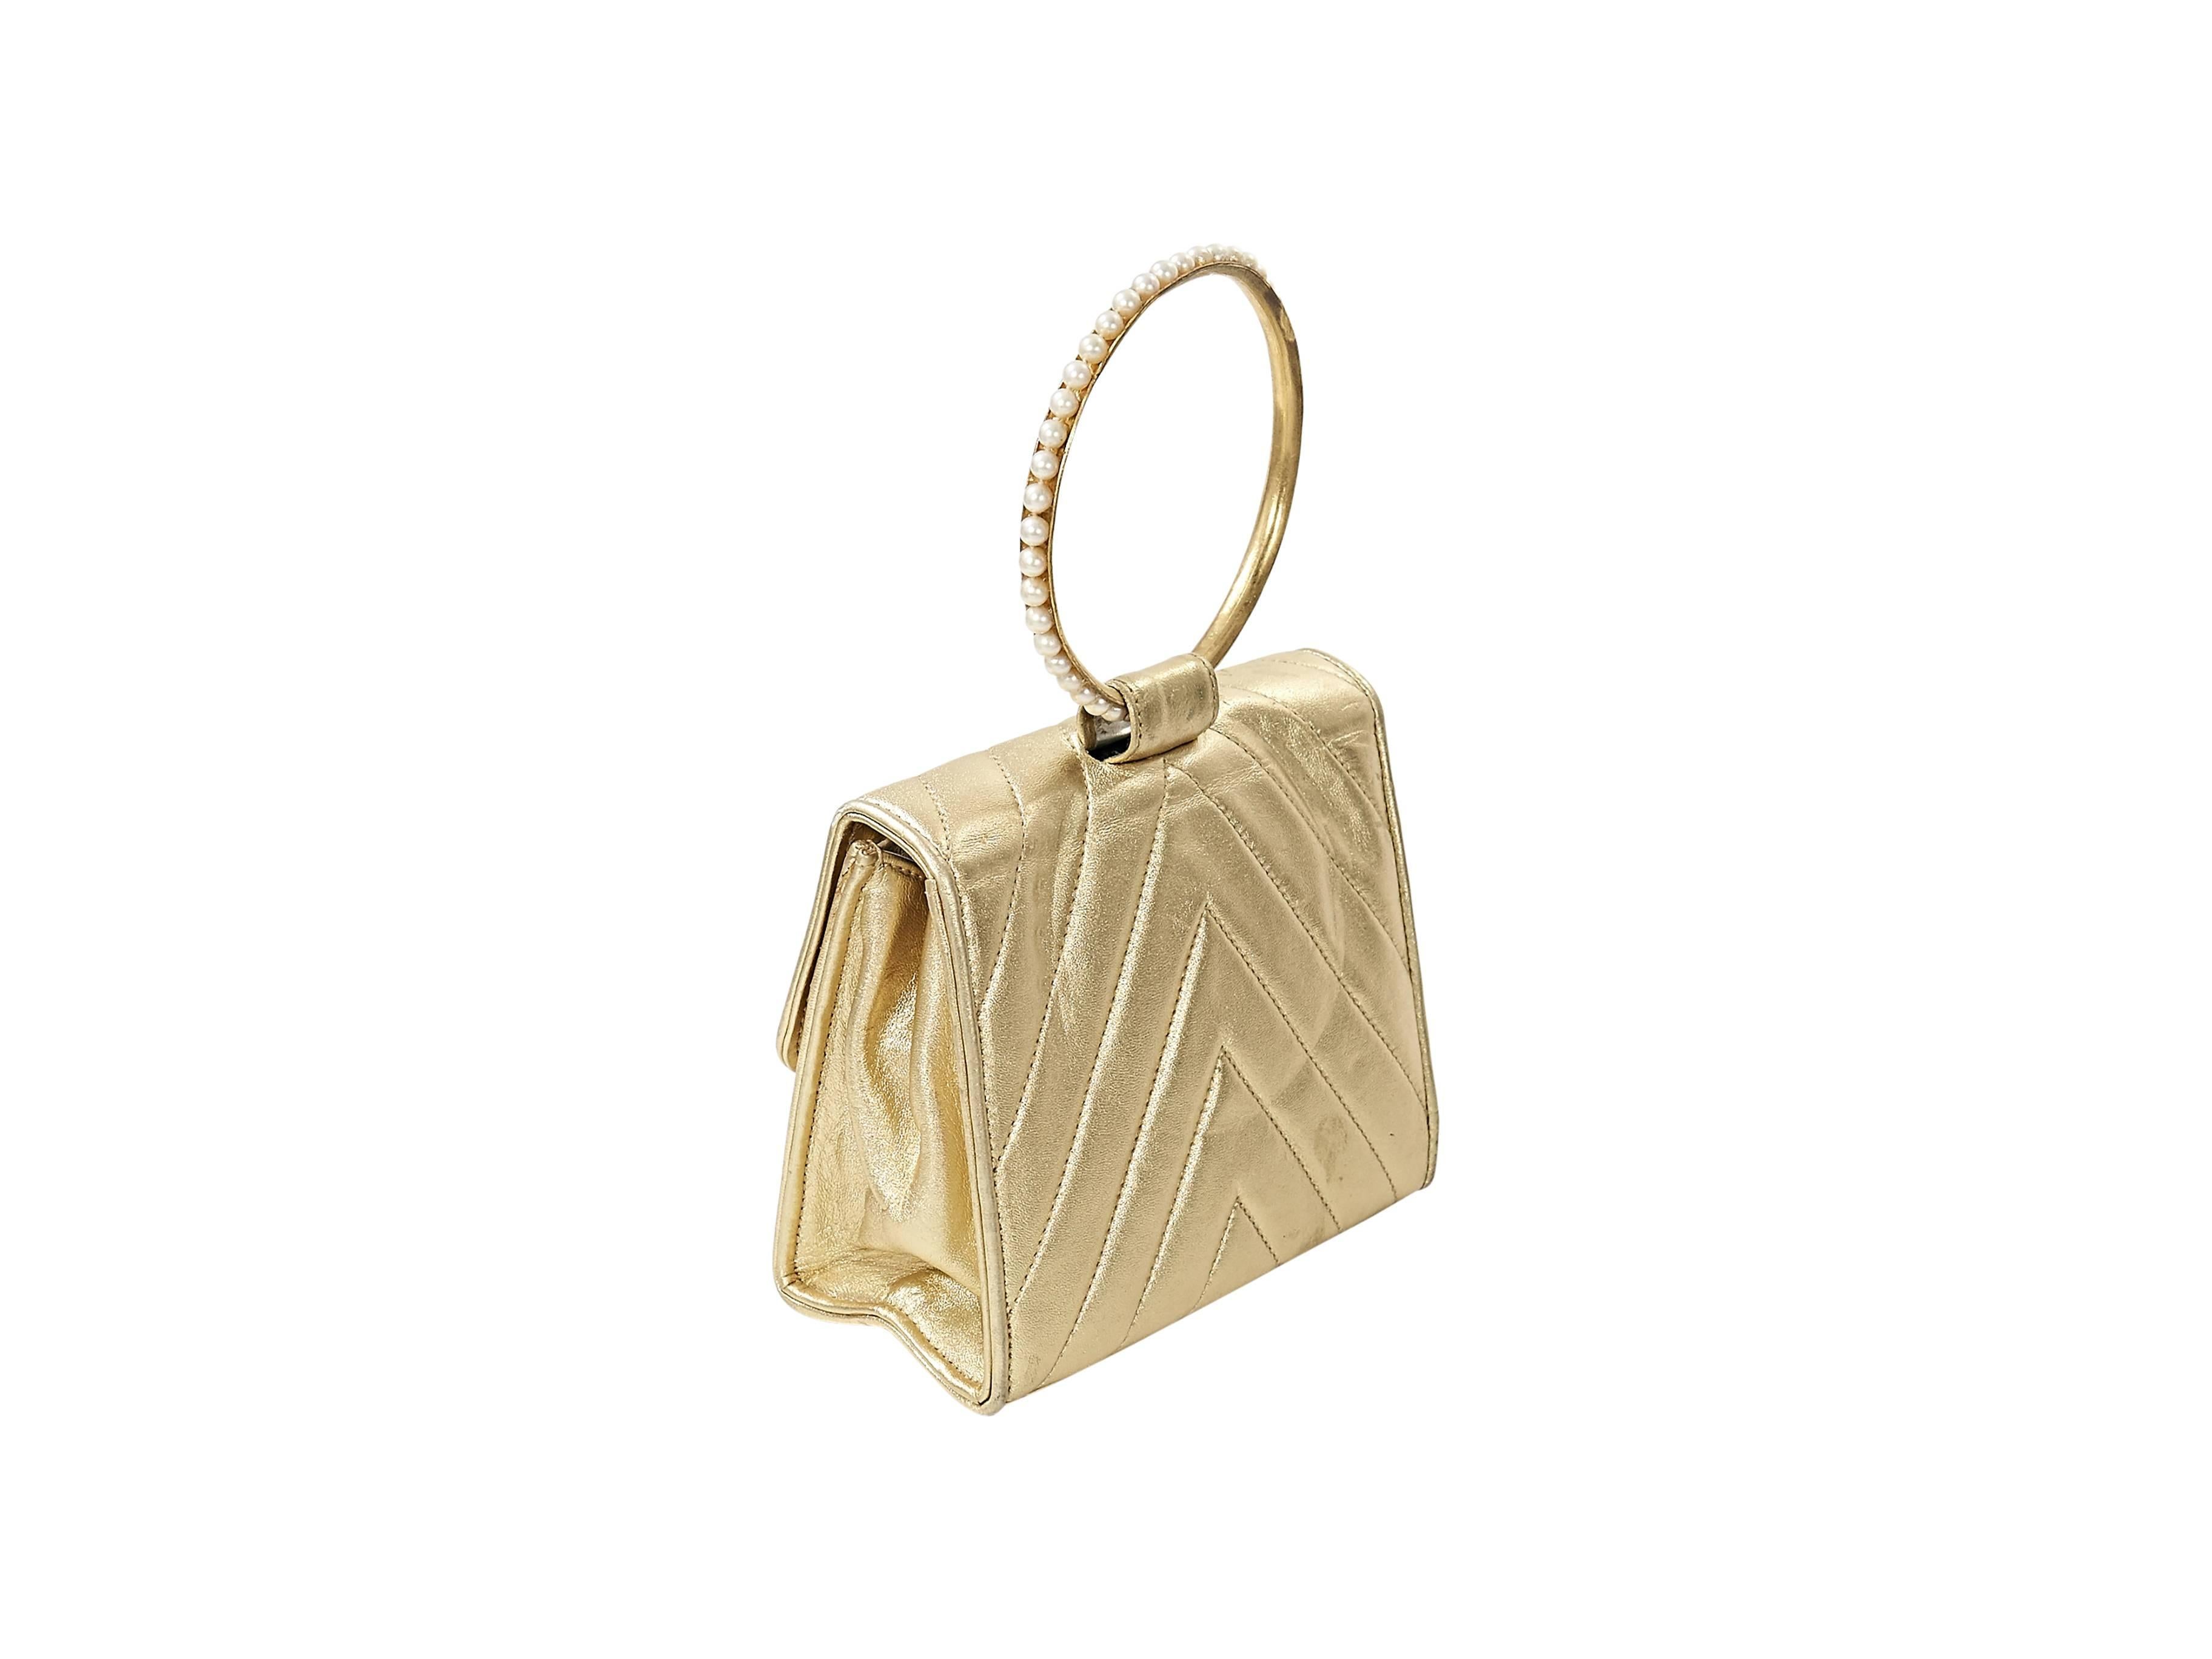 Product details:  Metallic gold quilted leather evening bag by Chanel.  Pearl embellished top ring handle.  Front flap.  Hidden magnetic snap closure.  Lined interior with inner zip pocket.  Authenticity included. 
Condition: Very good. 